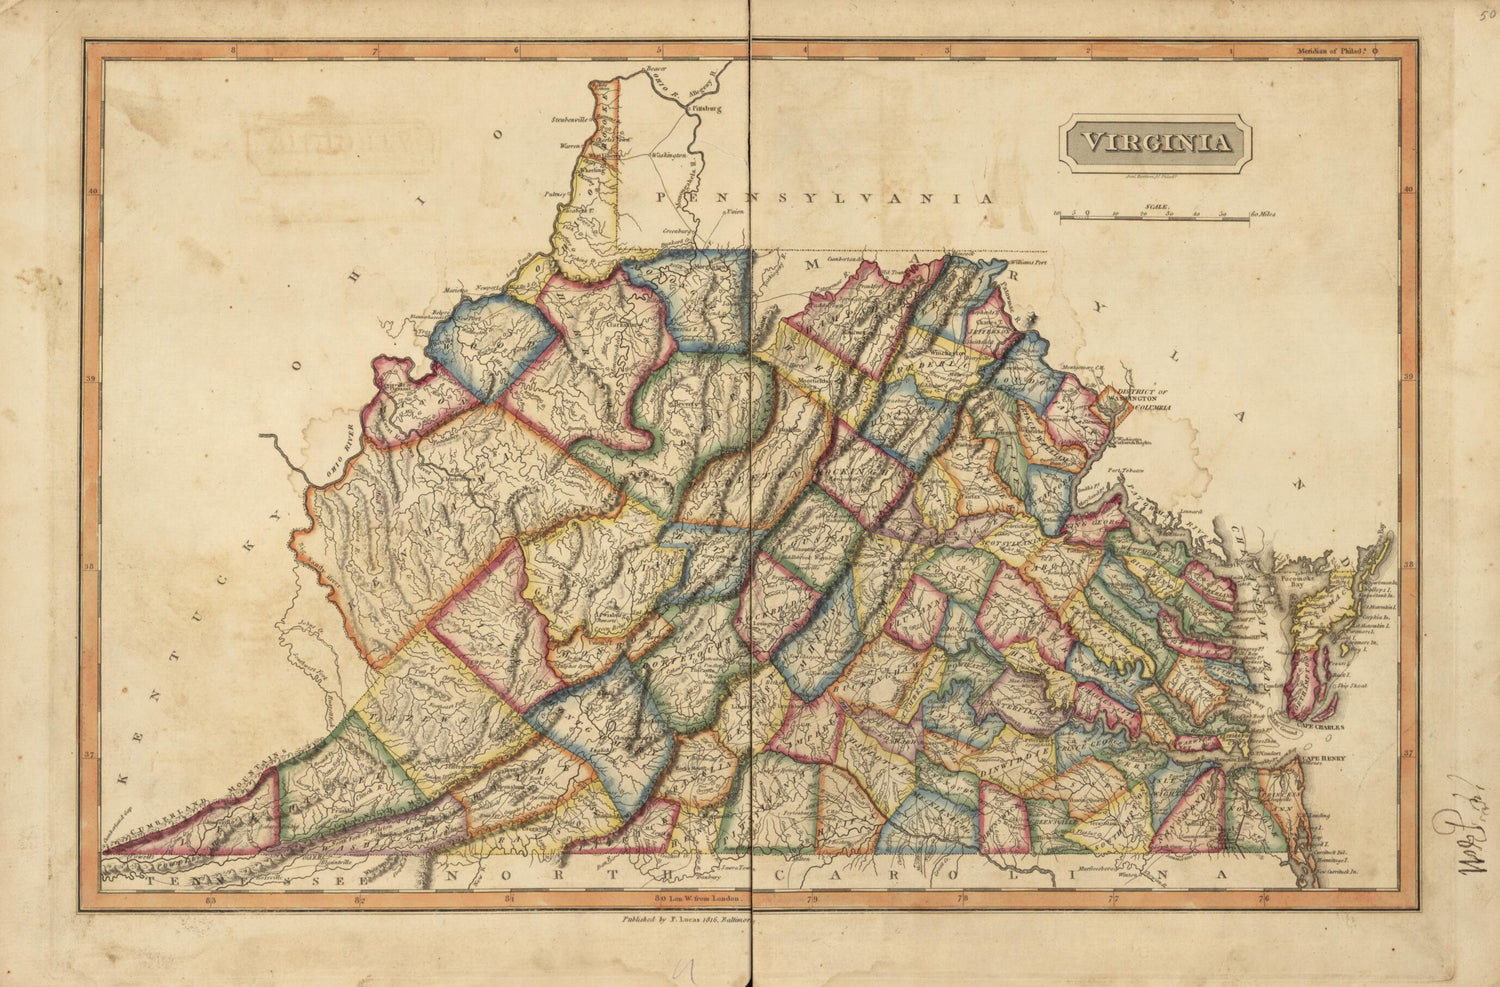 This old map of Virginia from a New and Elegant General Atlas, Containing Maps of Each of the United States. from 1817 was created by Henry Schenck Tanner in 1817